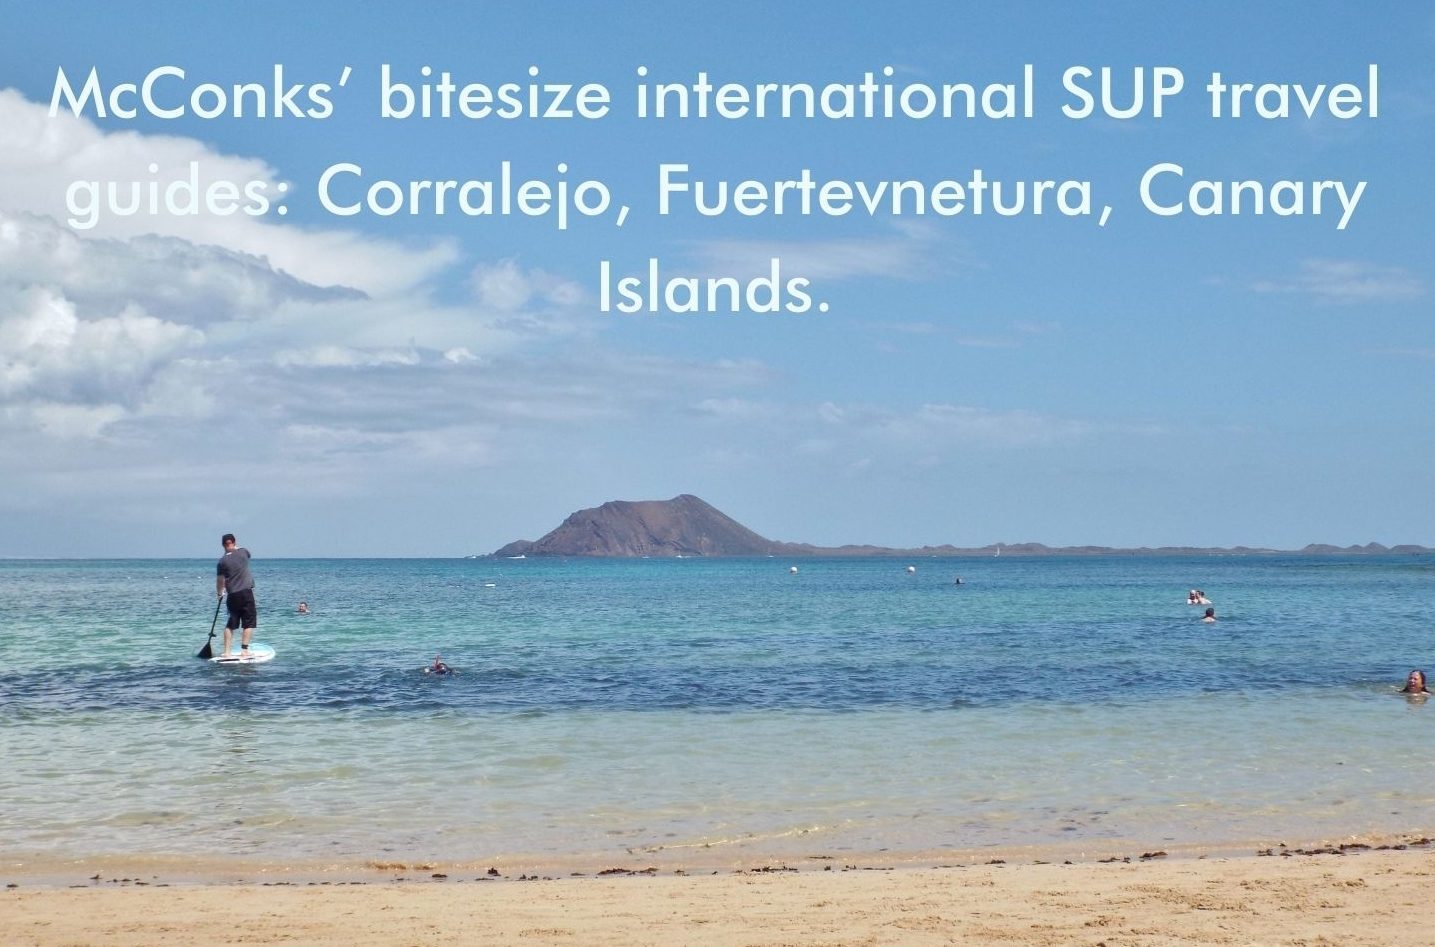 You are currently viewing McConks’ bitesize international SUP travel guides: Corralejo, Fuerteventura, Canary Islands.